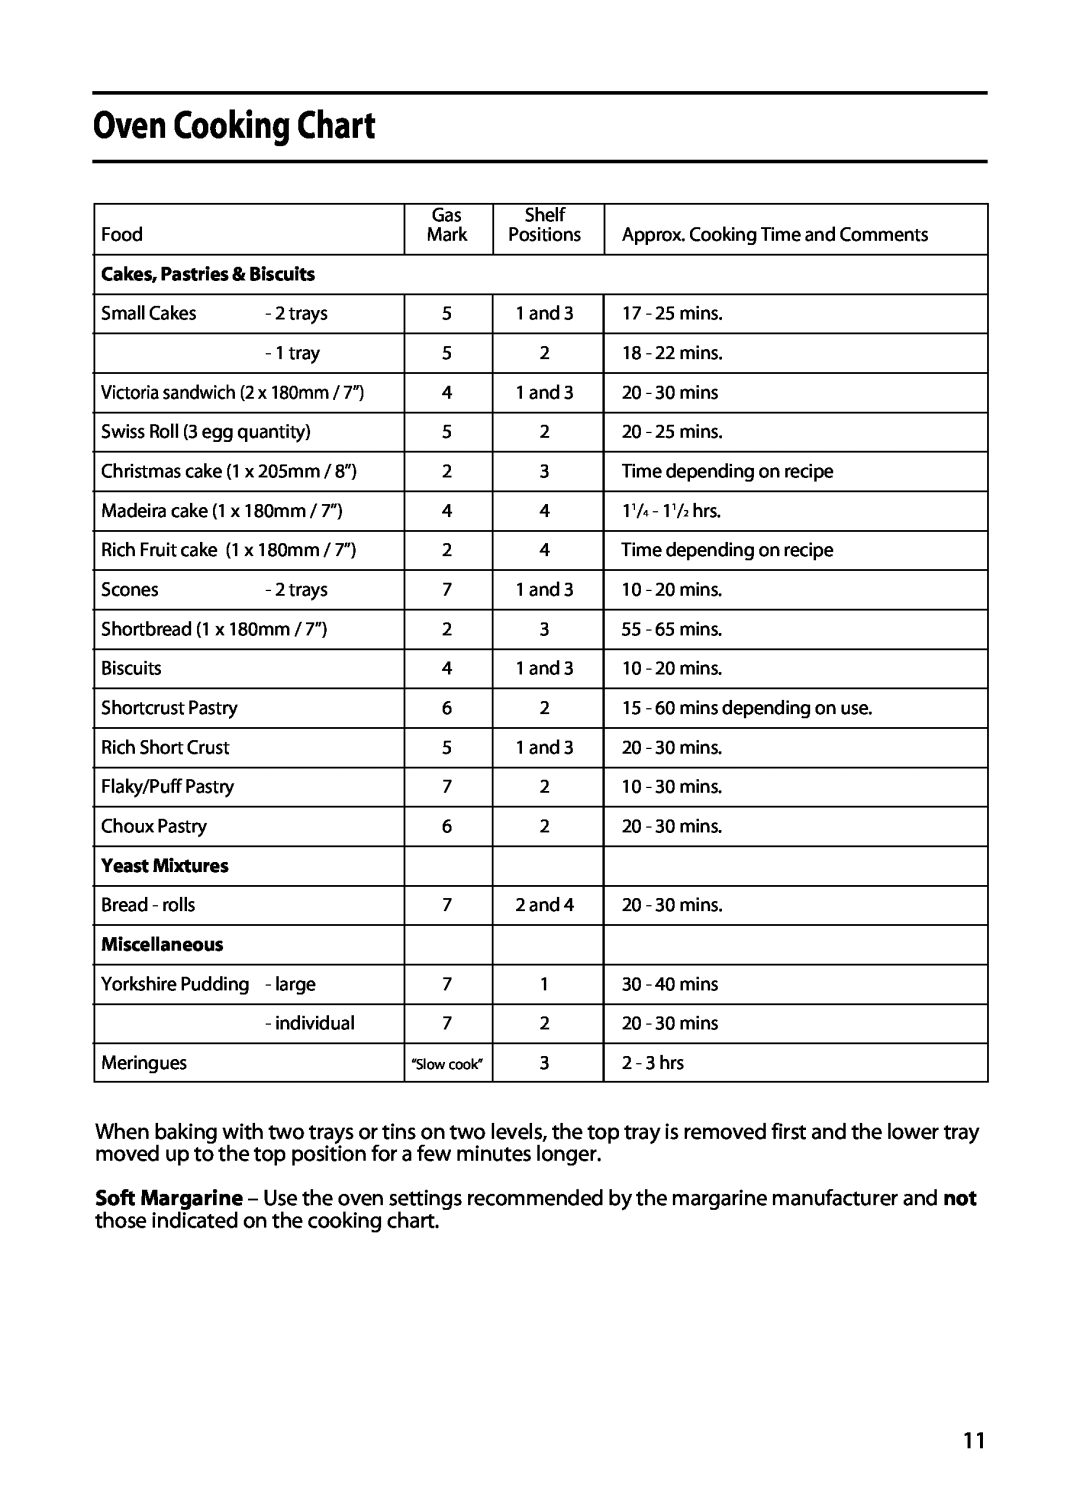 Hotpoint 5TCG manual Oven Cooking Chart, Cakes, Pastries & Biscuits, Yeast Mixtures, Miscellaneous 